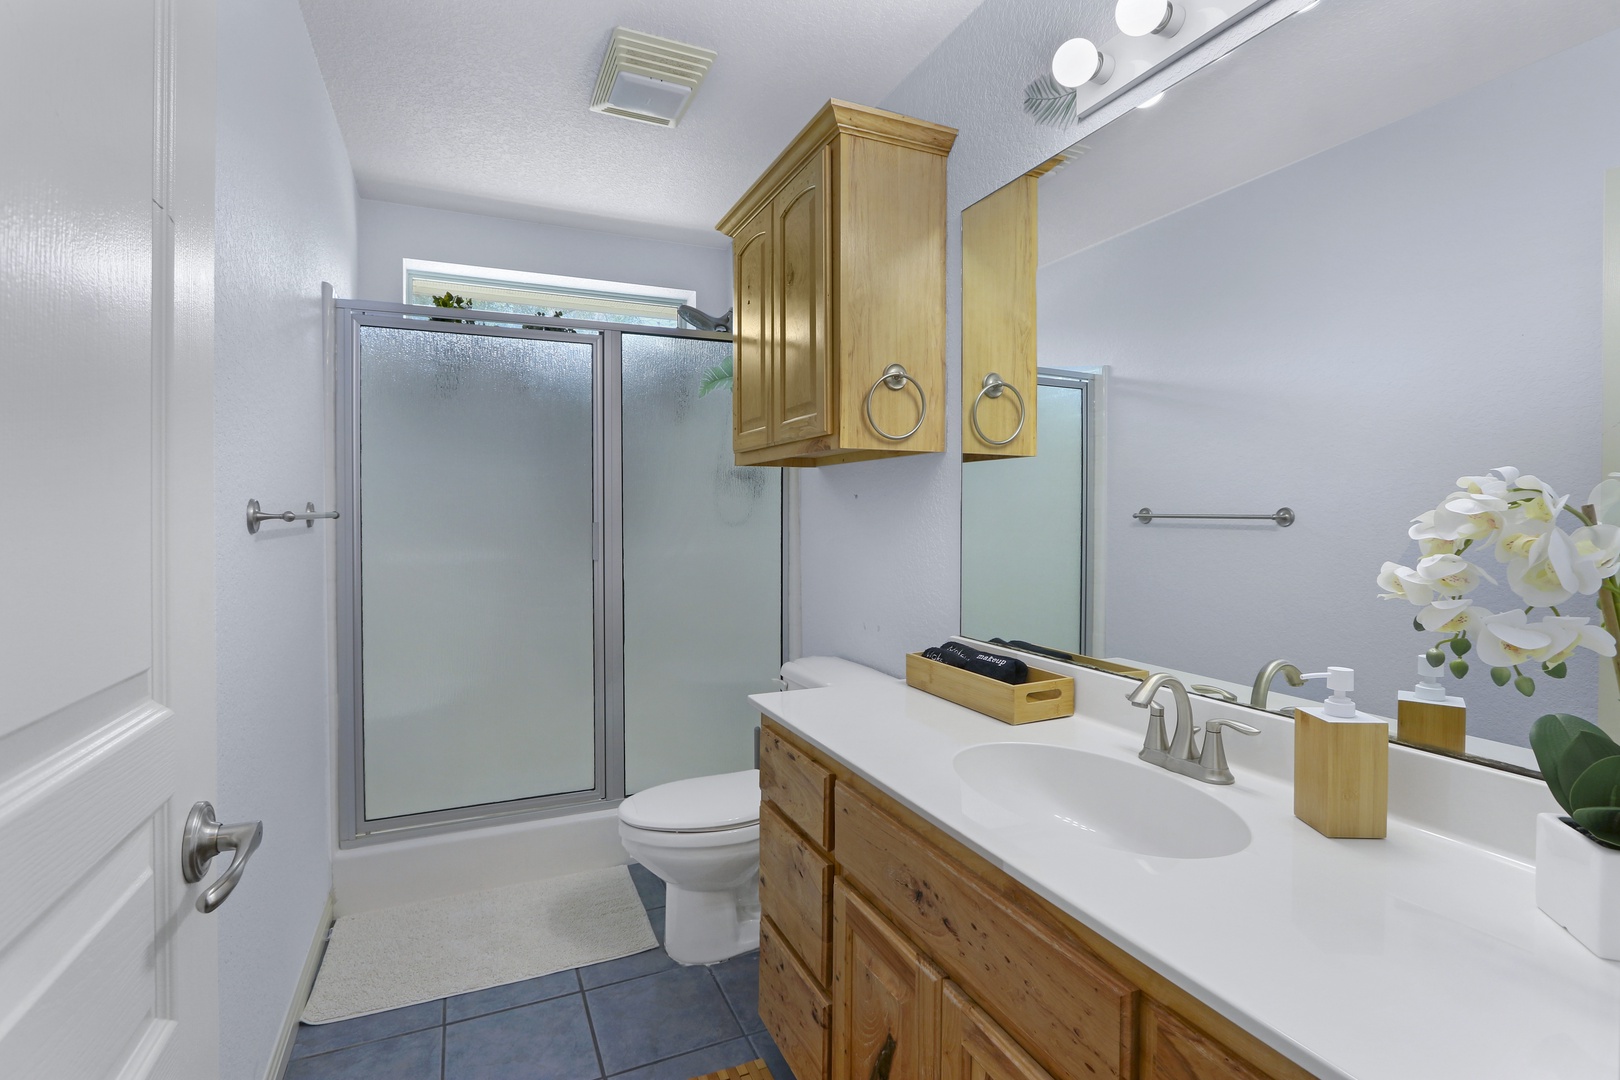 1 of 2 spacious full bathrooms, with an oversized vanity & glass shower